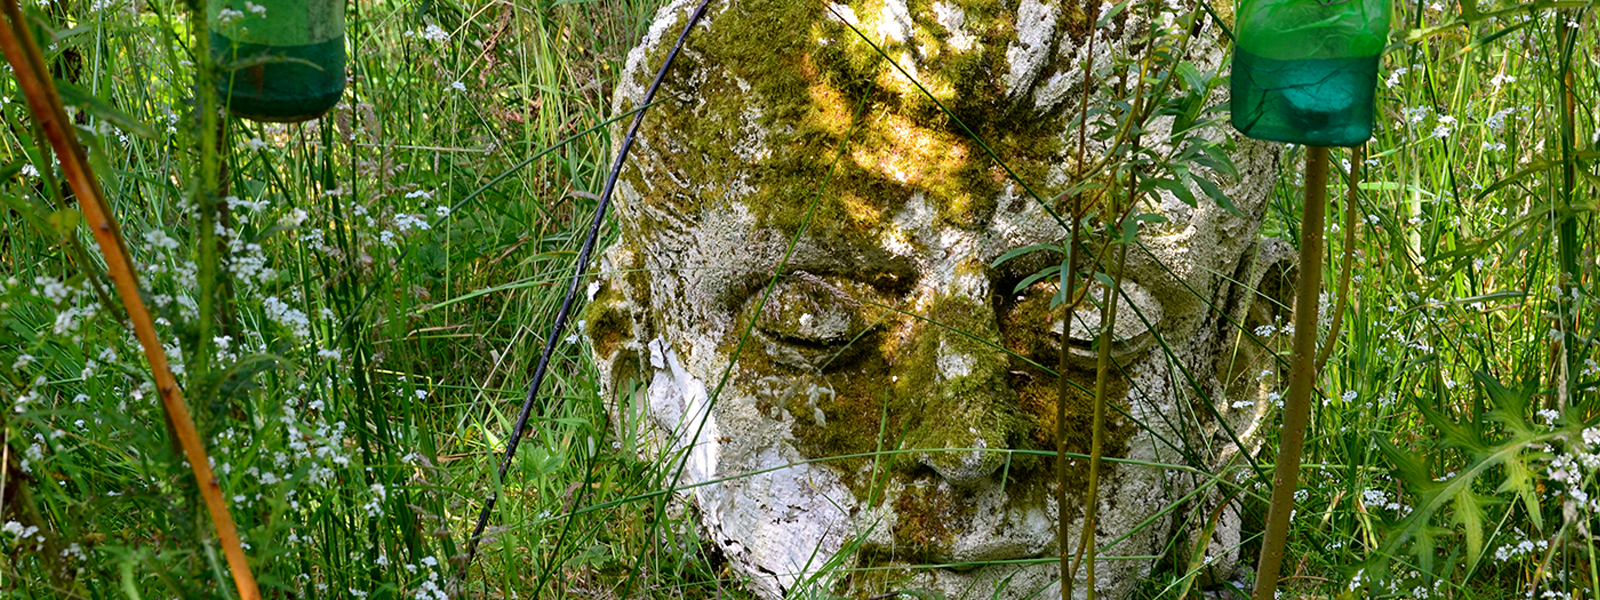 Mossy buddha head in the forest with a few lanterns hanging around